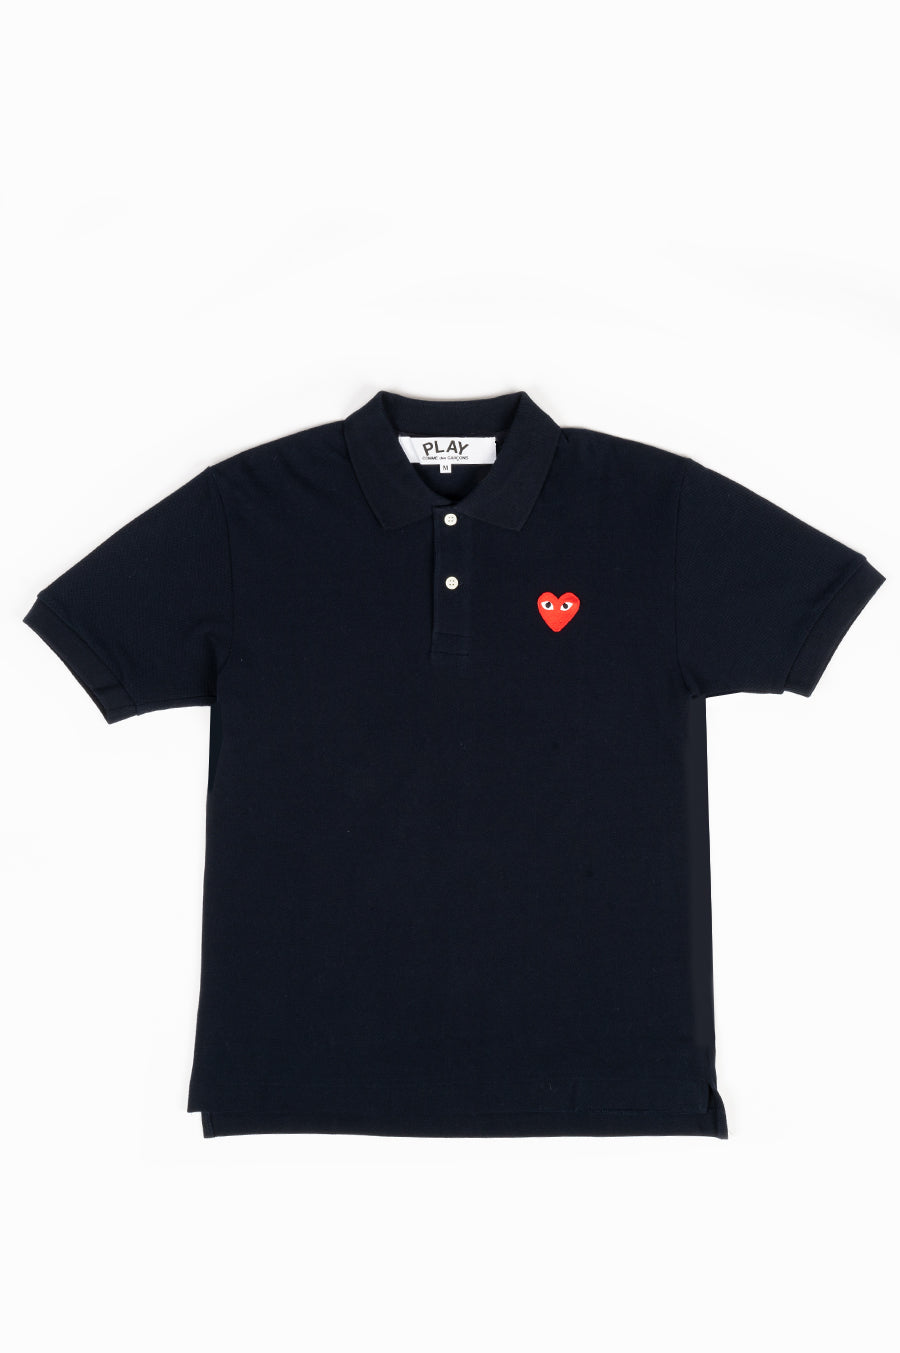 COMME DES GARCONS PLAY POLO TSHIRT NAVY RED HEART – BLENDS